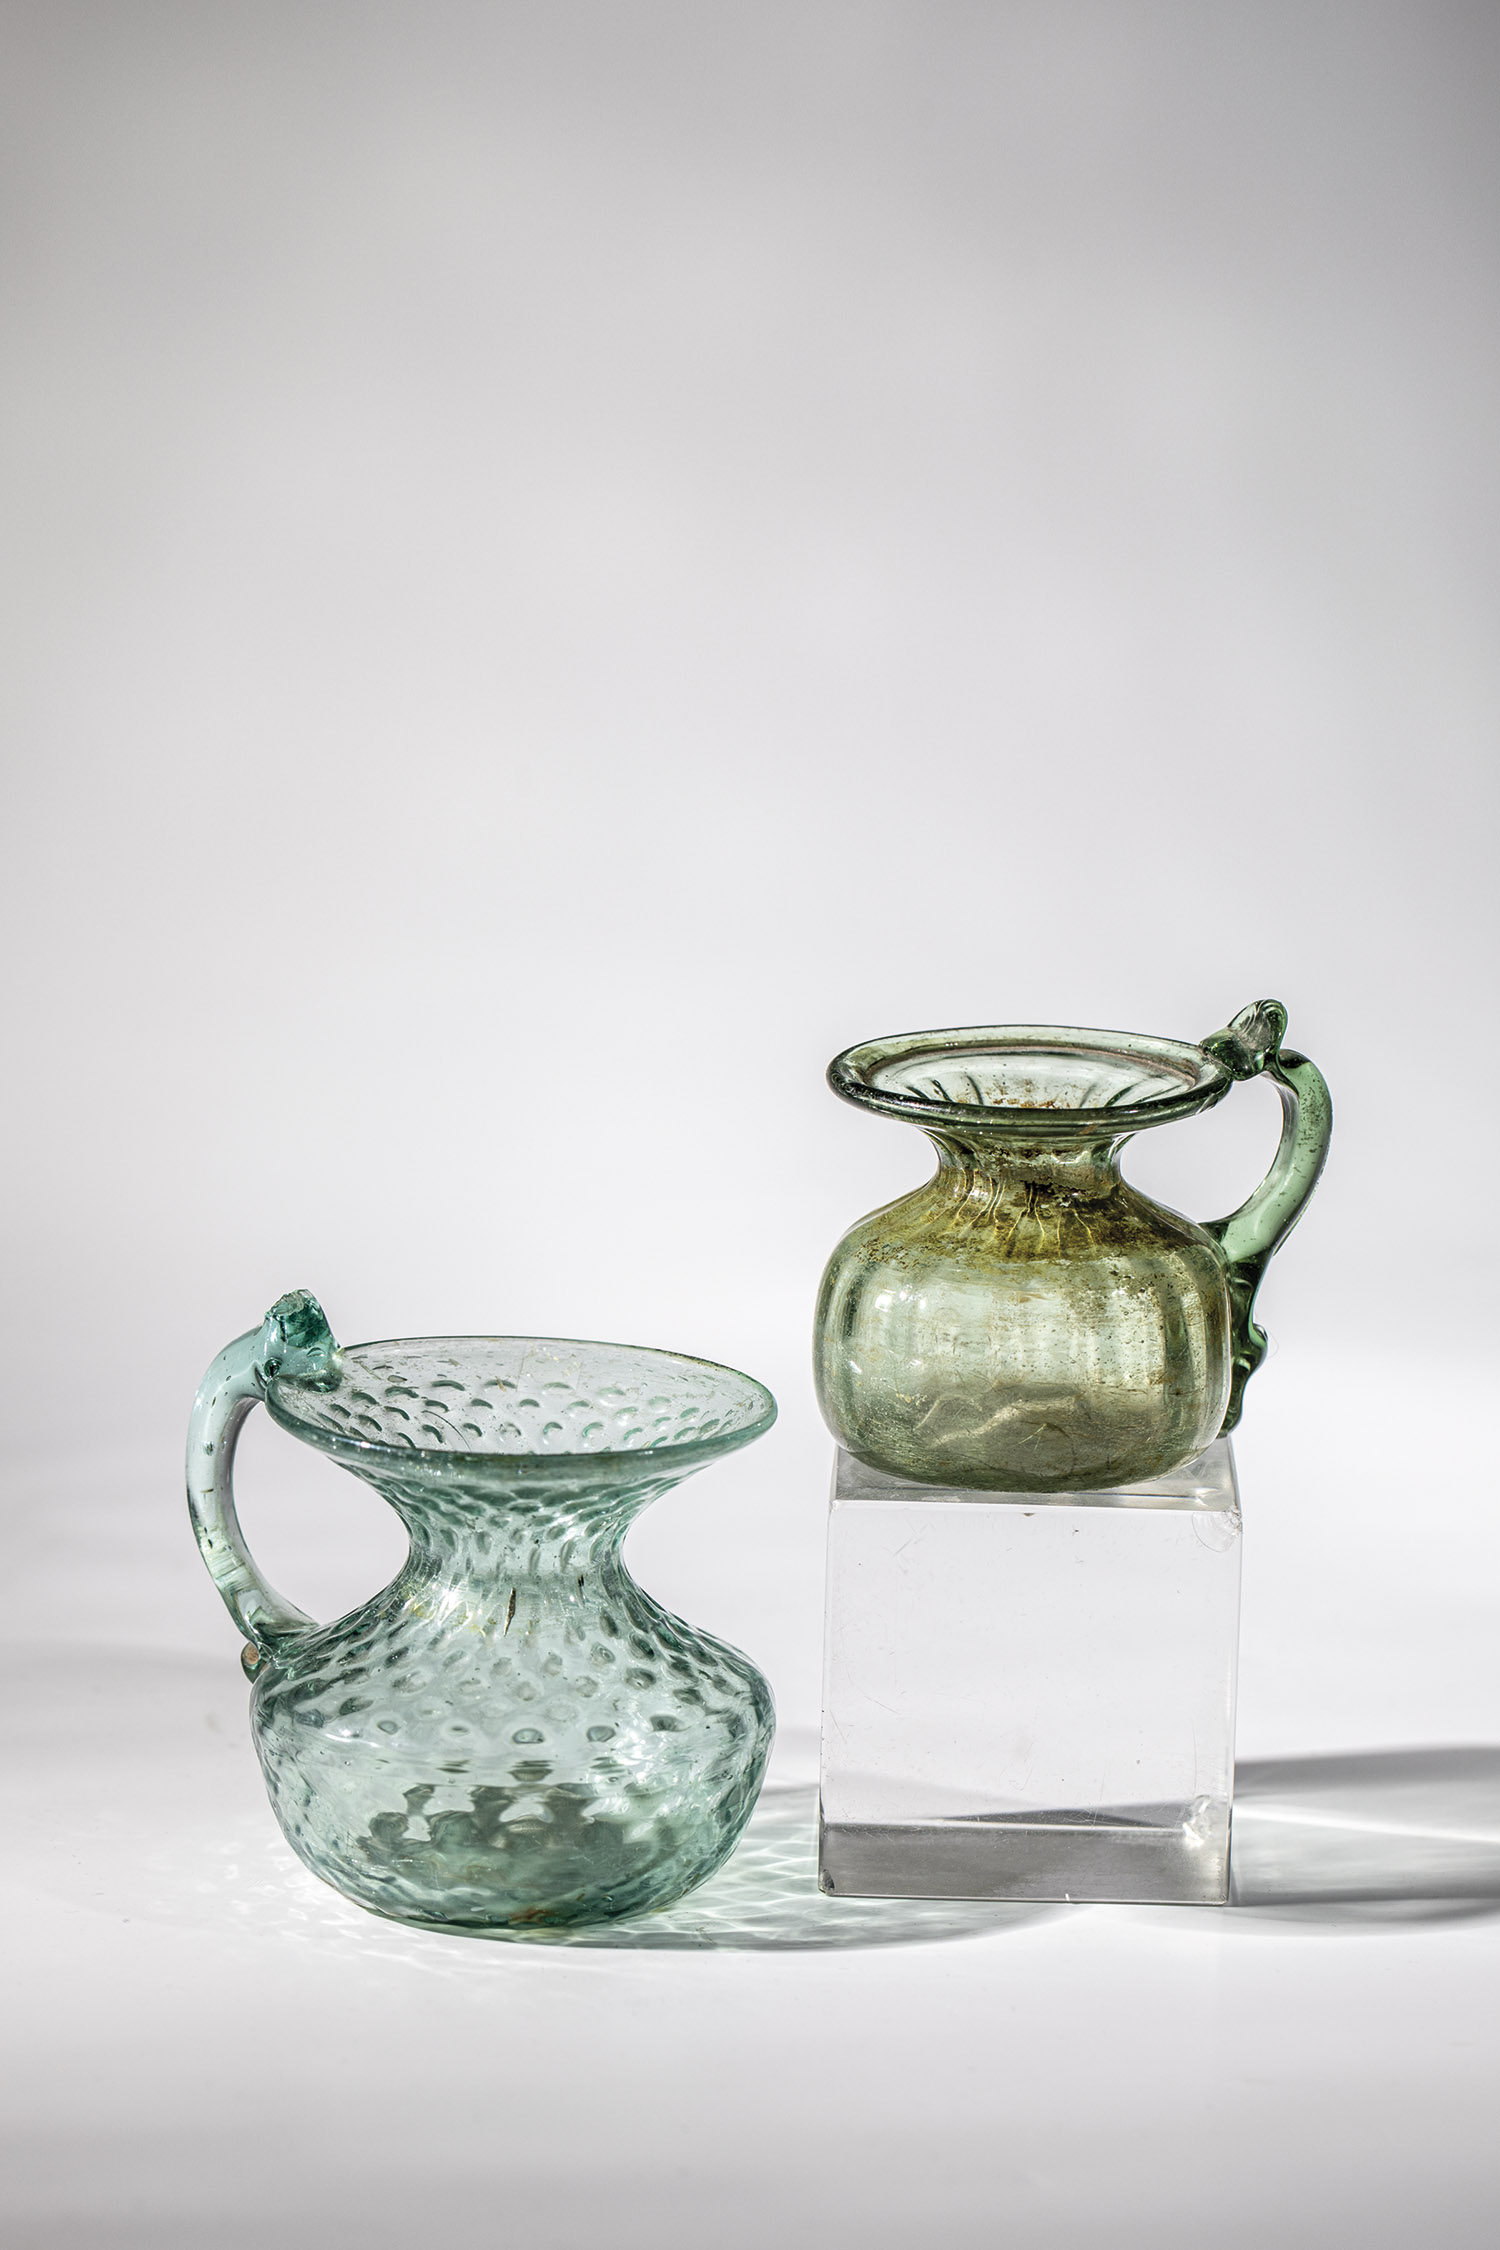 Two ink vessels Germany, 18th century tear-off glasses. Green or blue-green glass, constricted below